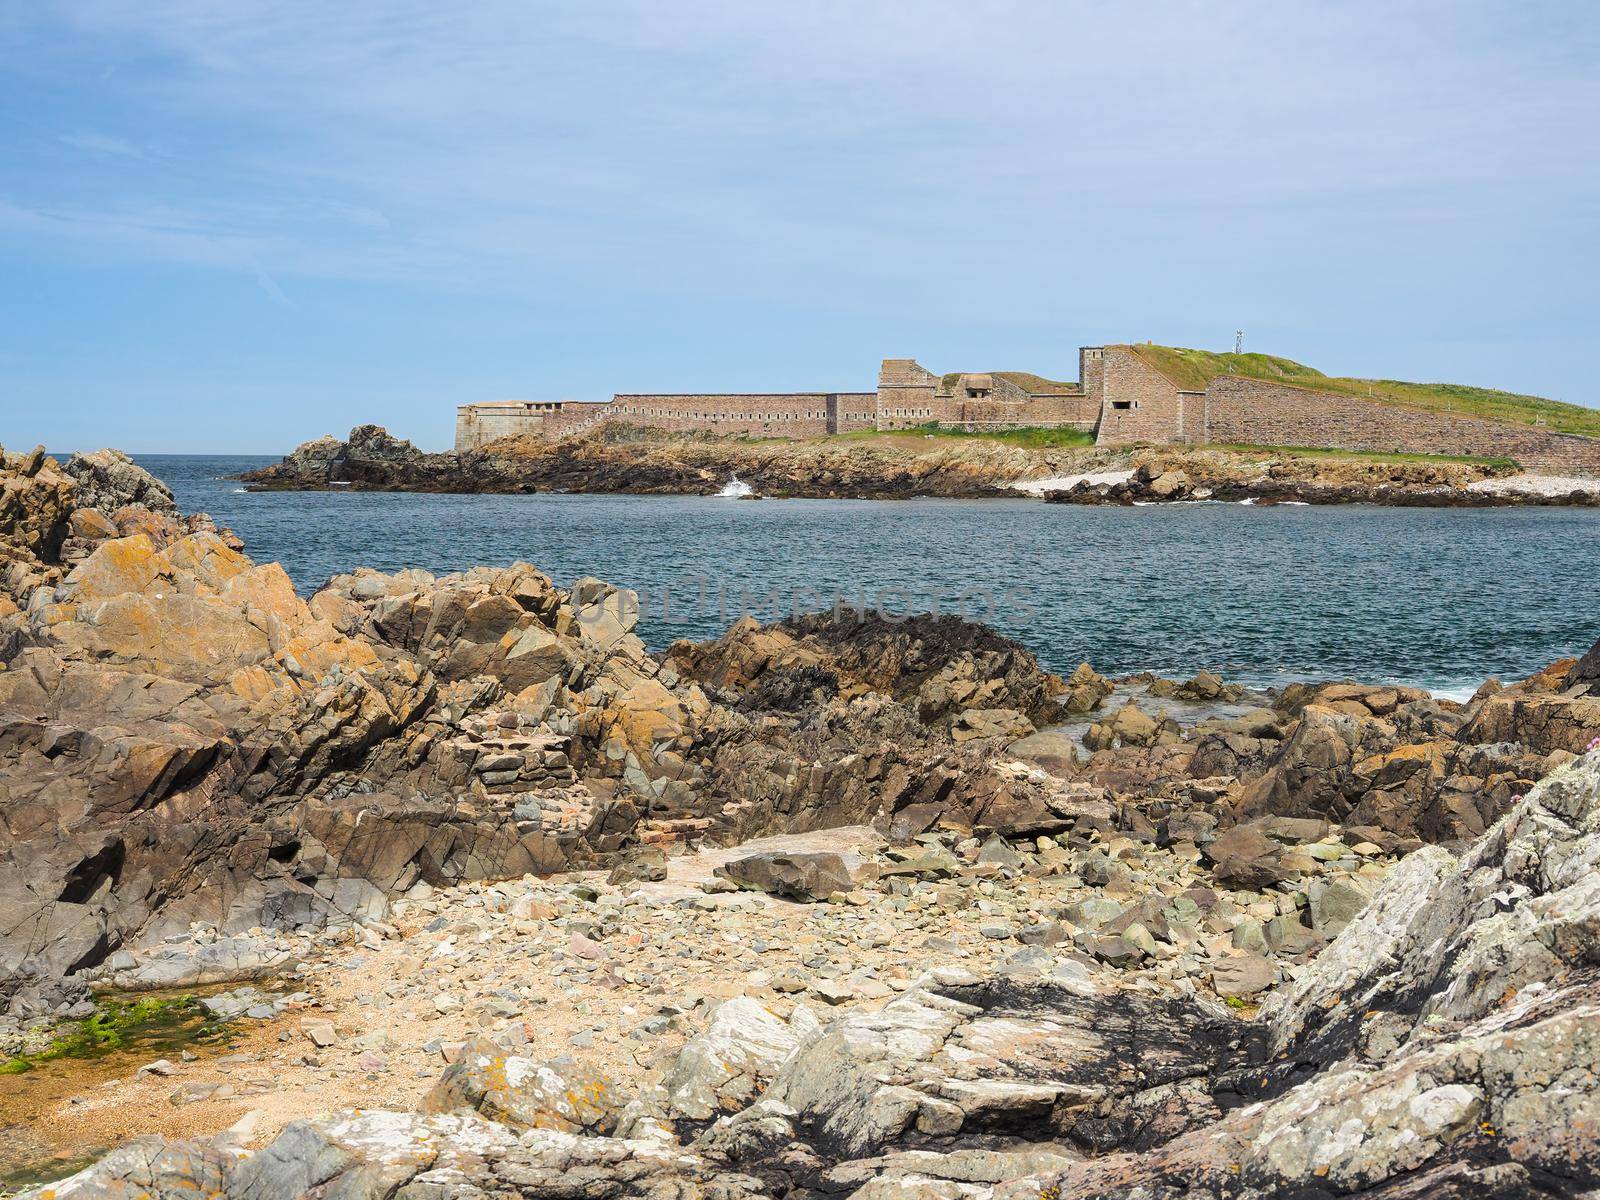 View across rocky bay to Fort Grosnez from Fort Doyle, Alderney, Channel Islands by PhilHarland